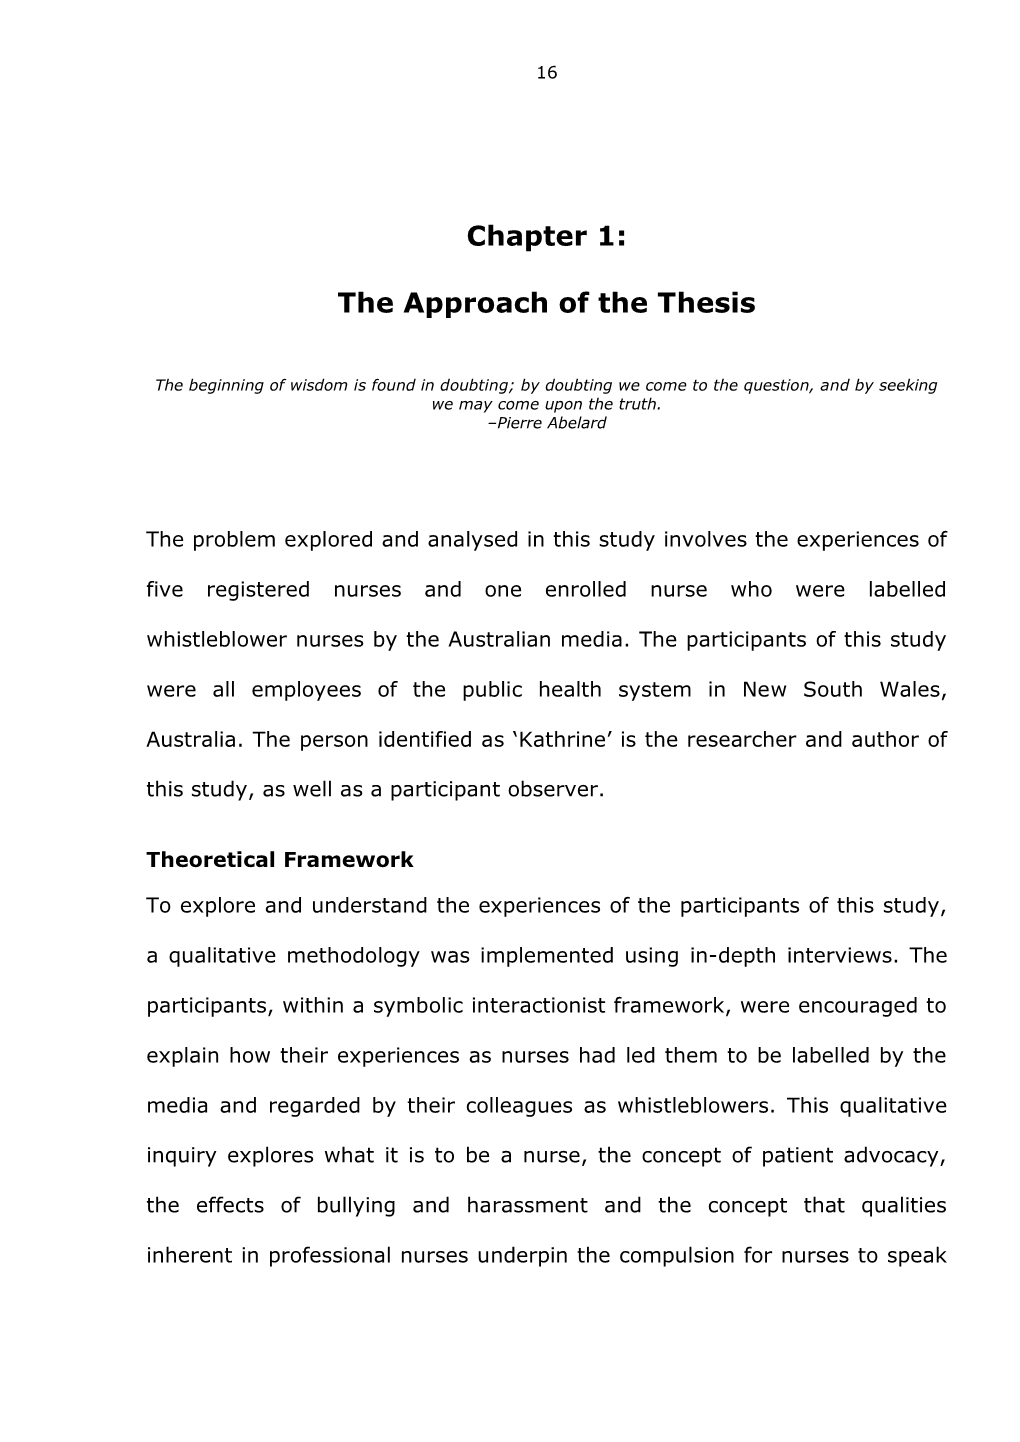 Chapter 1: the Approach of the Thesis